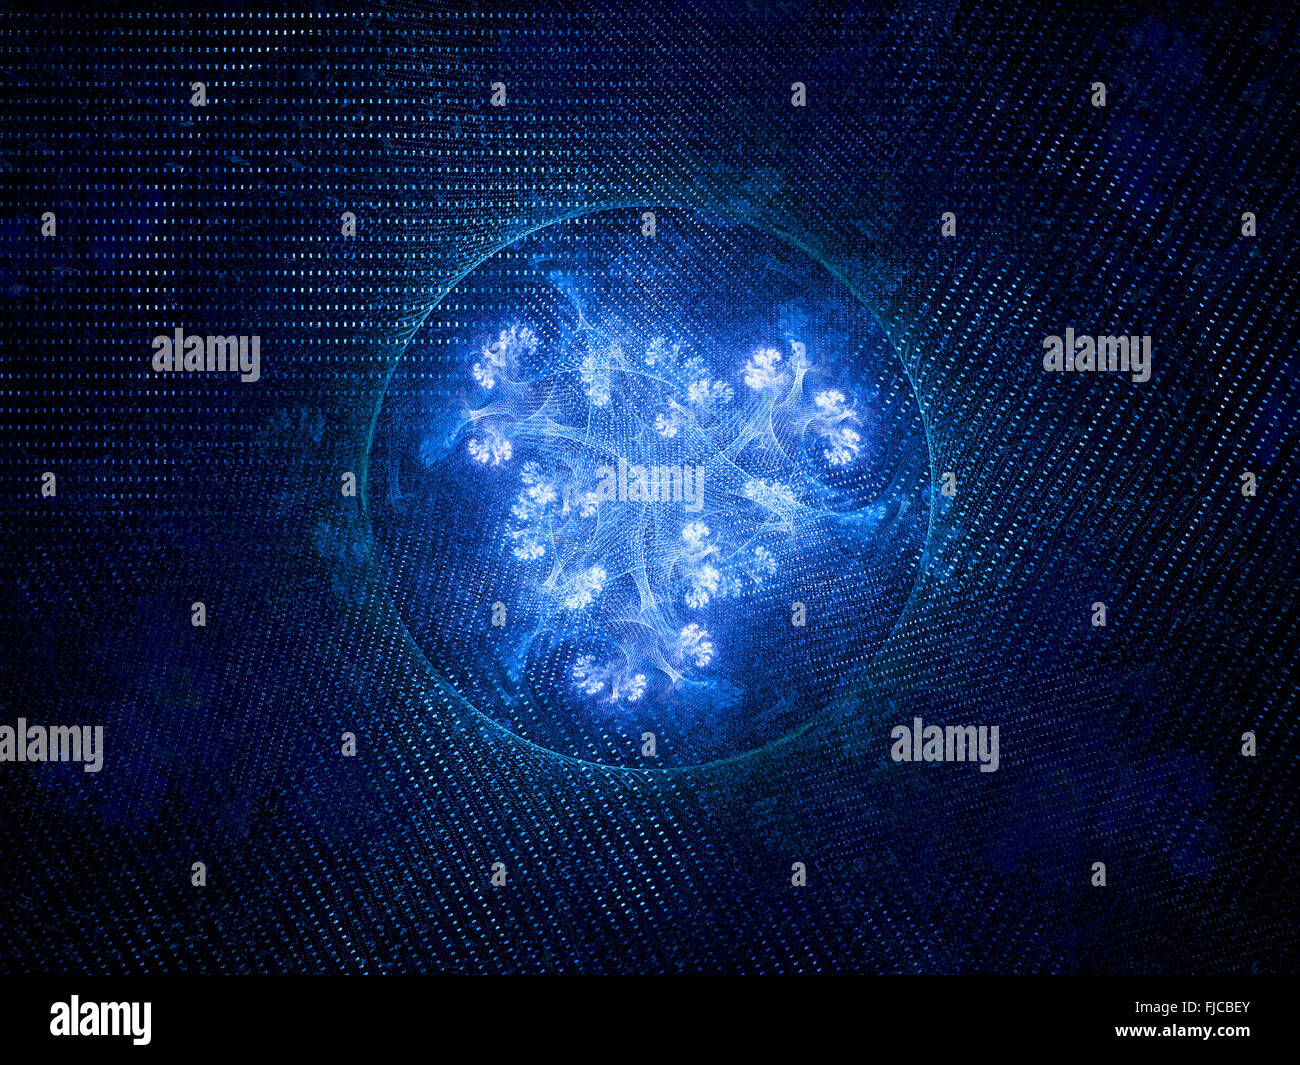 Blue glowing fractal artwork, computer generated abstract background Stock Photo